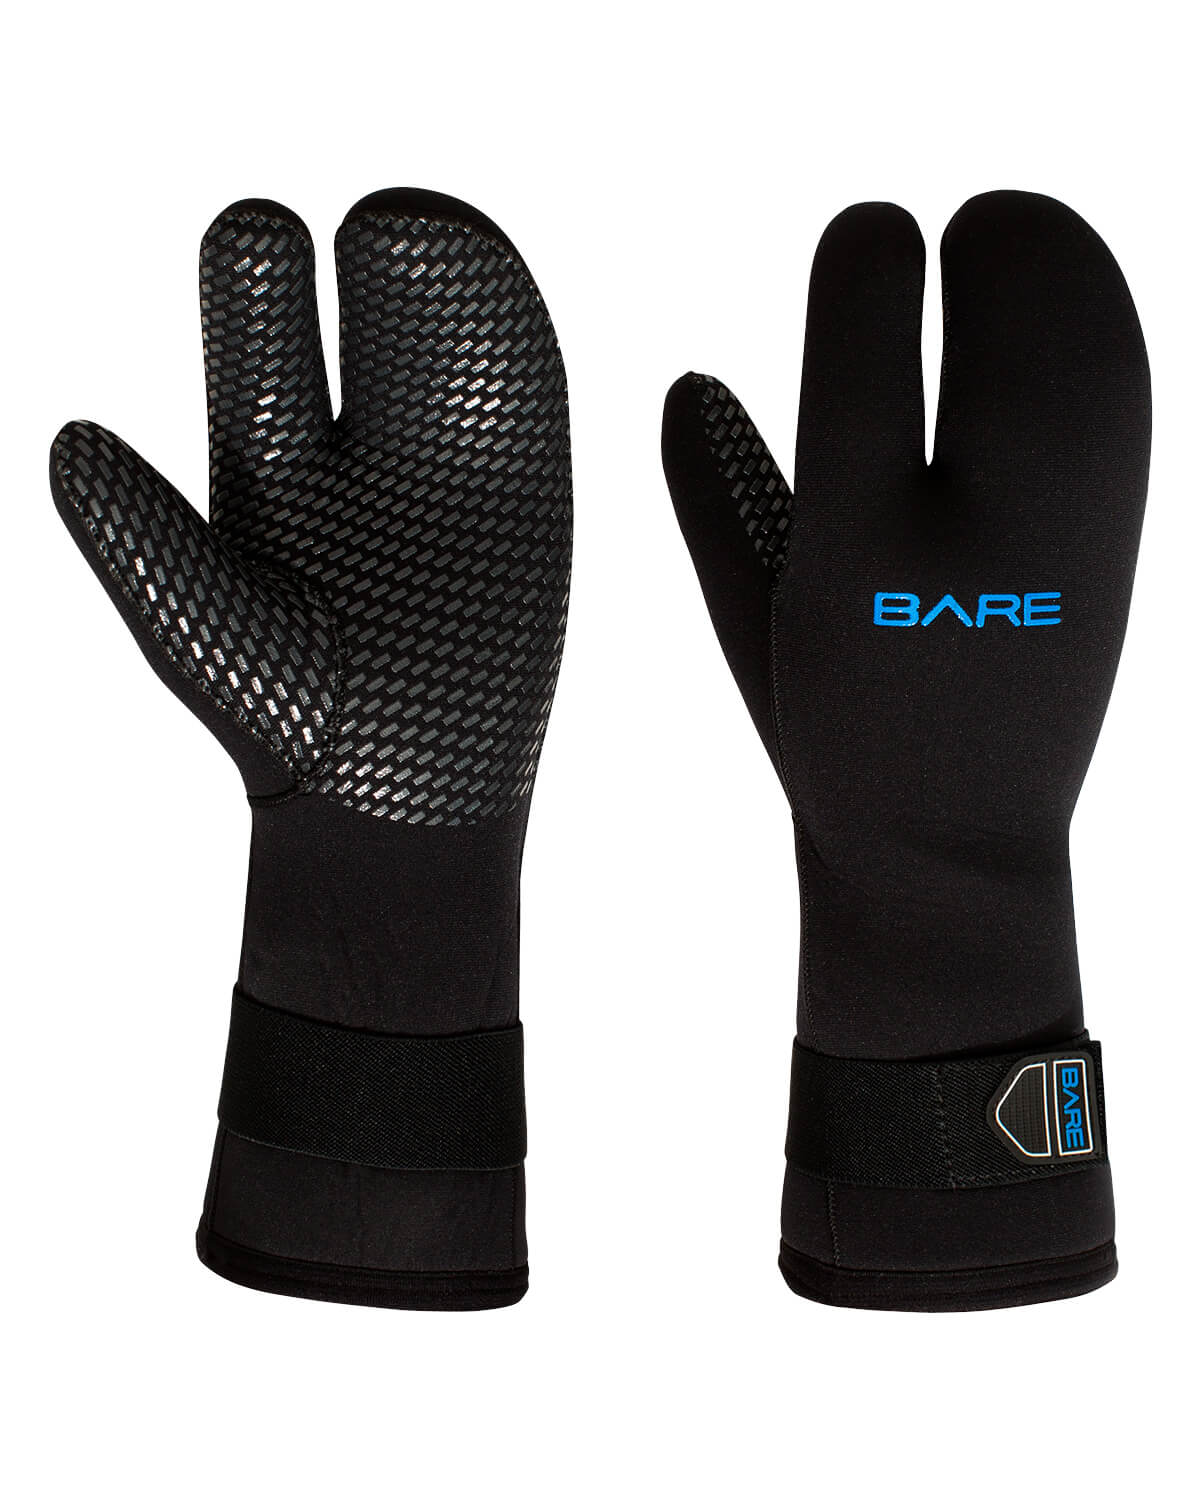 7mm BARE 3-Finger Wetsuit Mitts